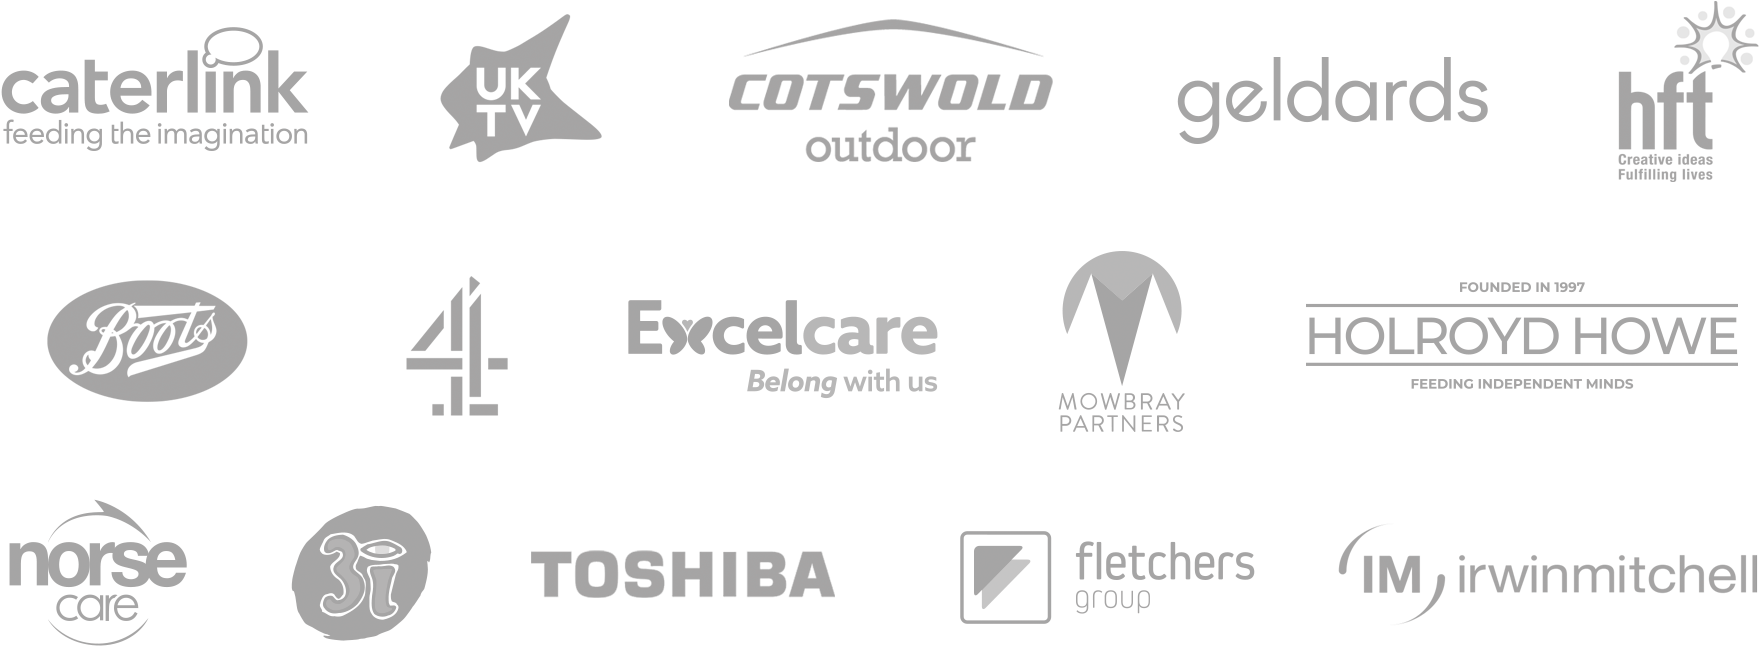 Caterlink, UKTV, Cotswold, Geldards, HFT, Boots, Channel 4, Excelcare, Mowbray Partners, Holroyd Howe, Norsecare, 3i, Toshiba, Fletchers Group, Irwin Mitchell